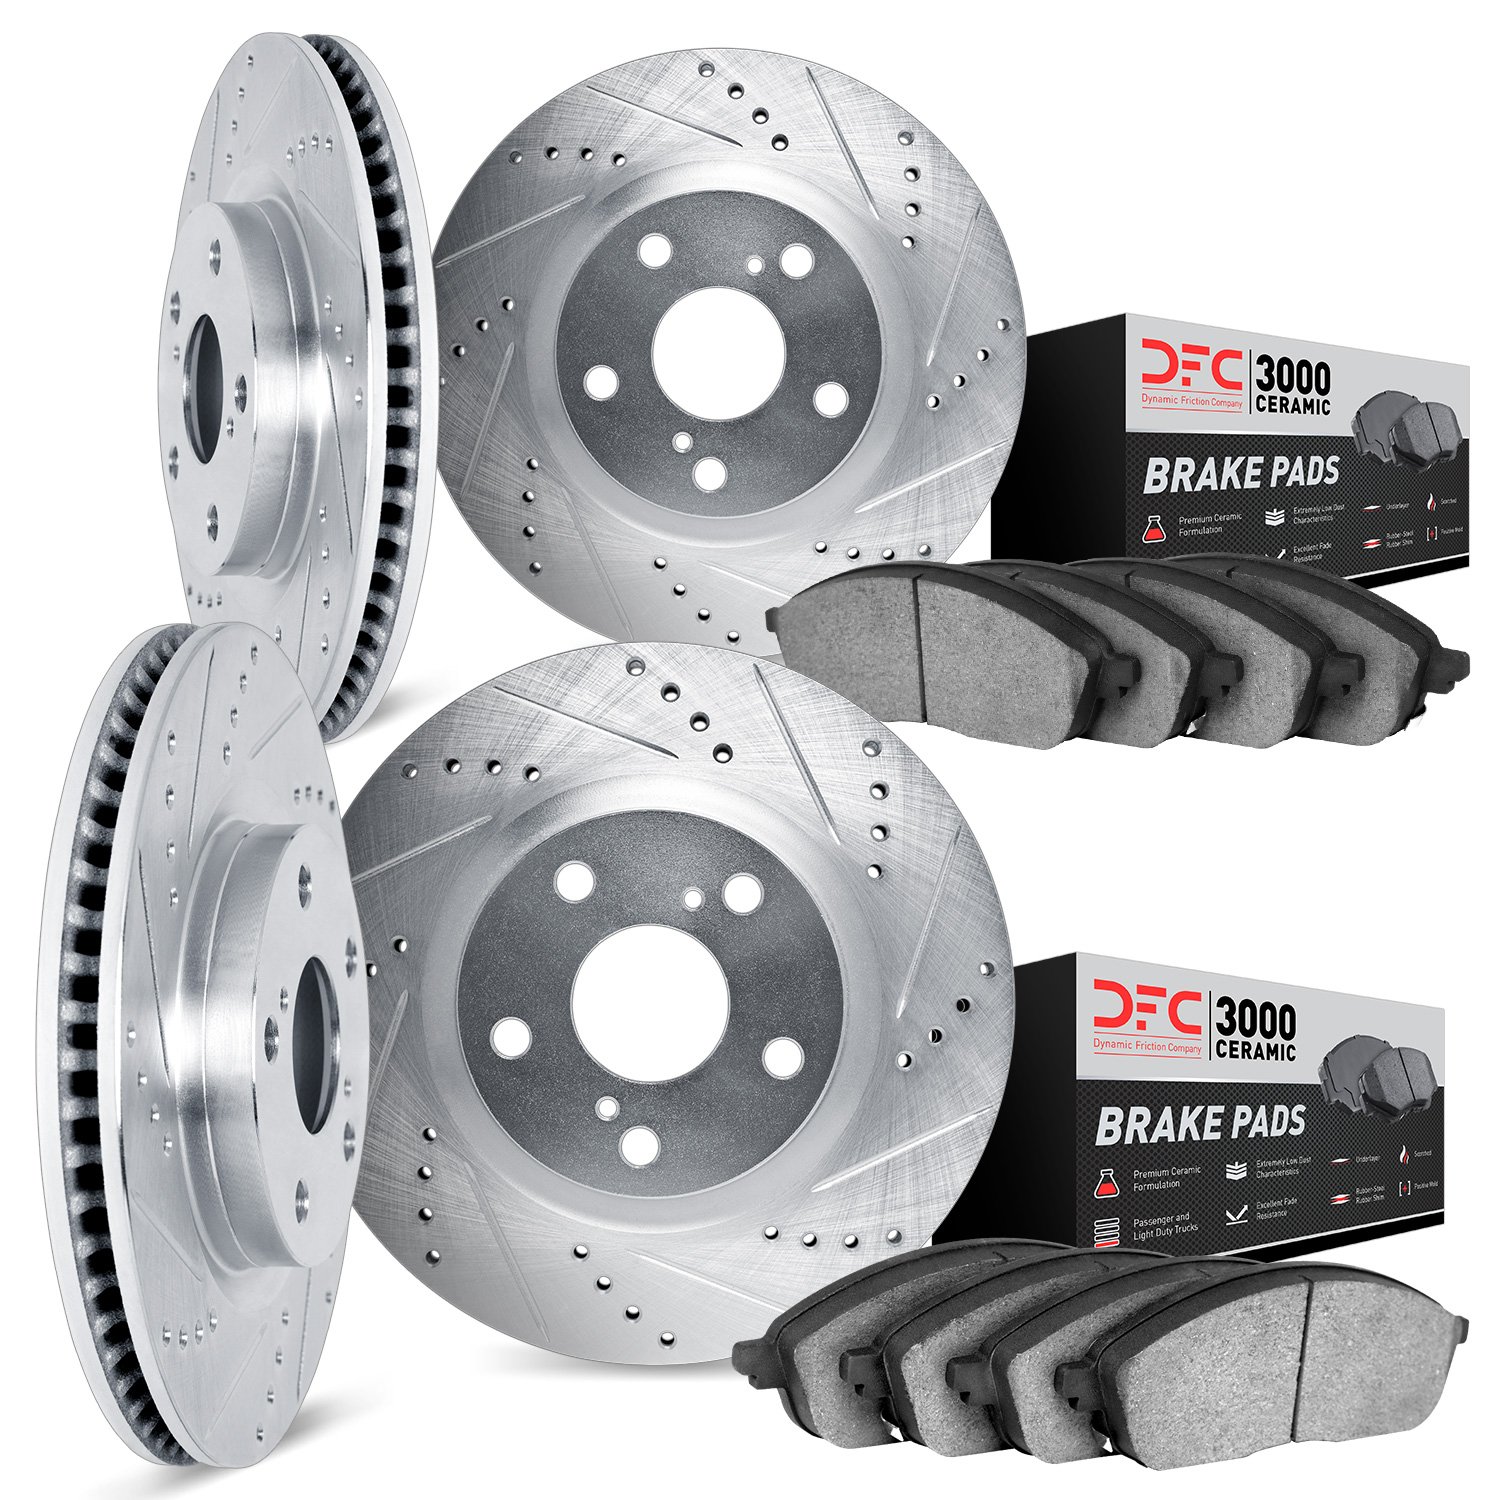 7304-31051 Drilled/Slotted Brake Rotor with 3000-Series Ceramic Brake Pads Kit [Silver], 2004-2010 BMW, Position: Front and Rear